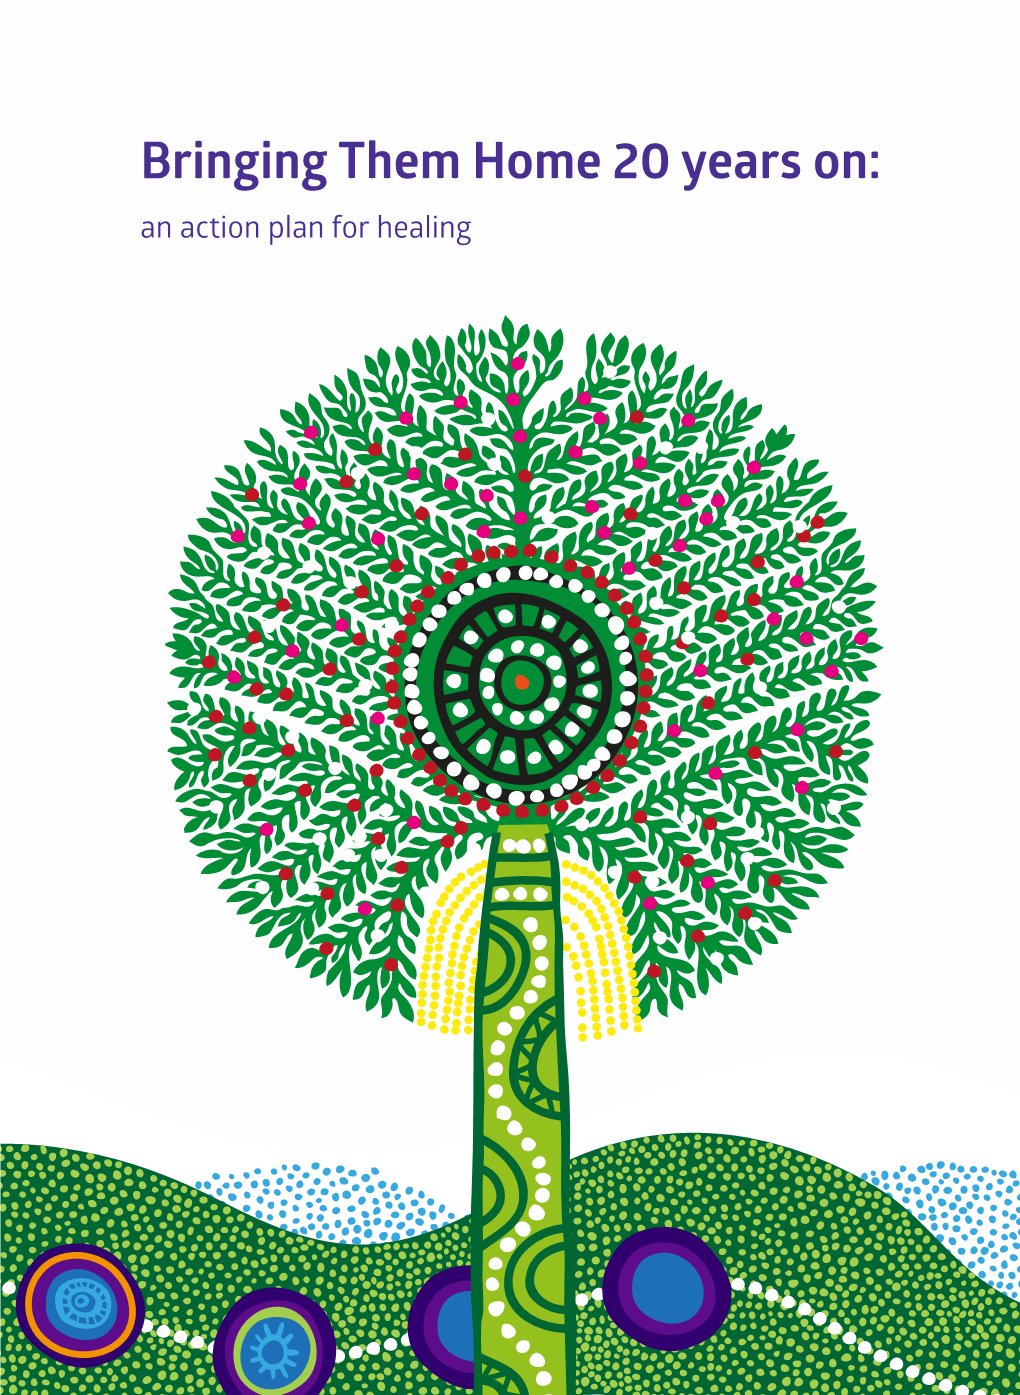 Bringing Them Home 20 Years On: an Action Plan for Healing Bringing Them Home 20 Years On: an Action Plan for Healing